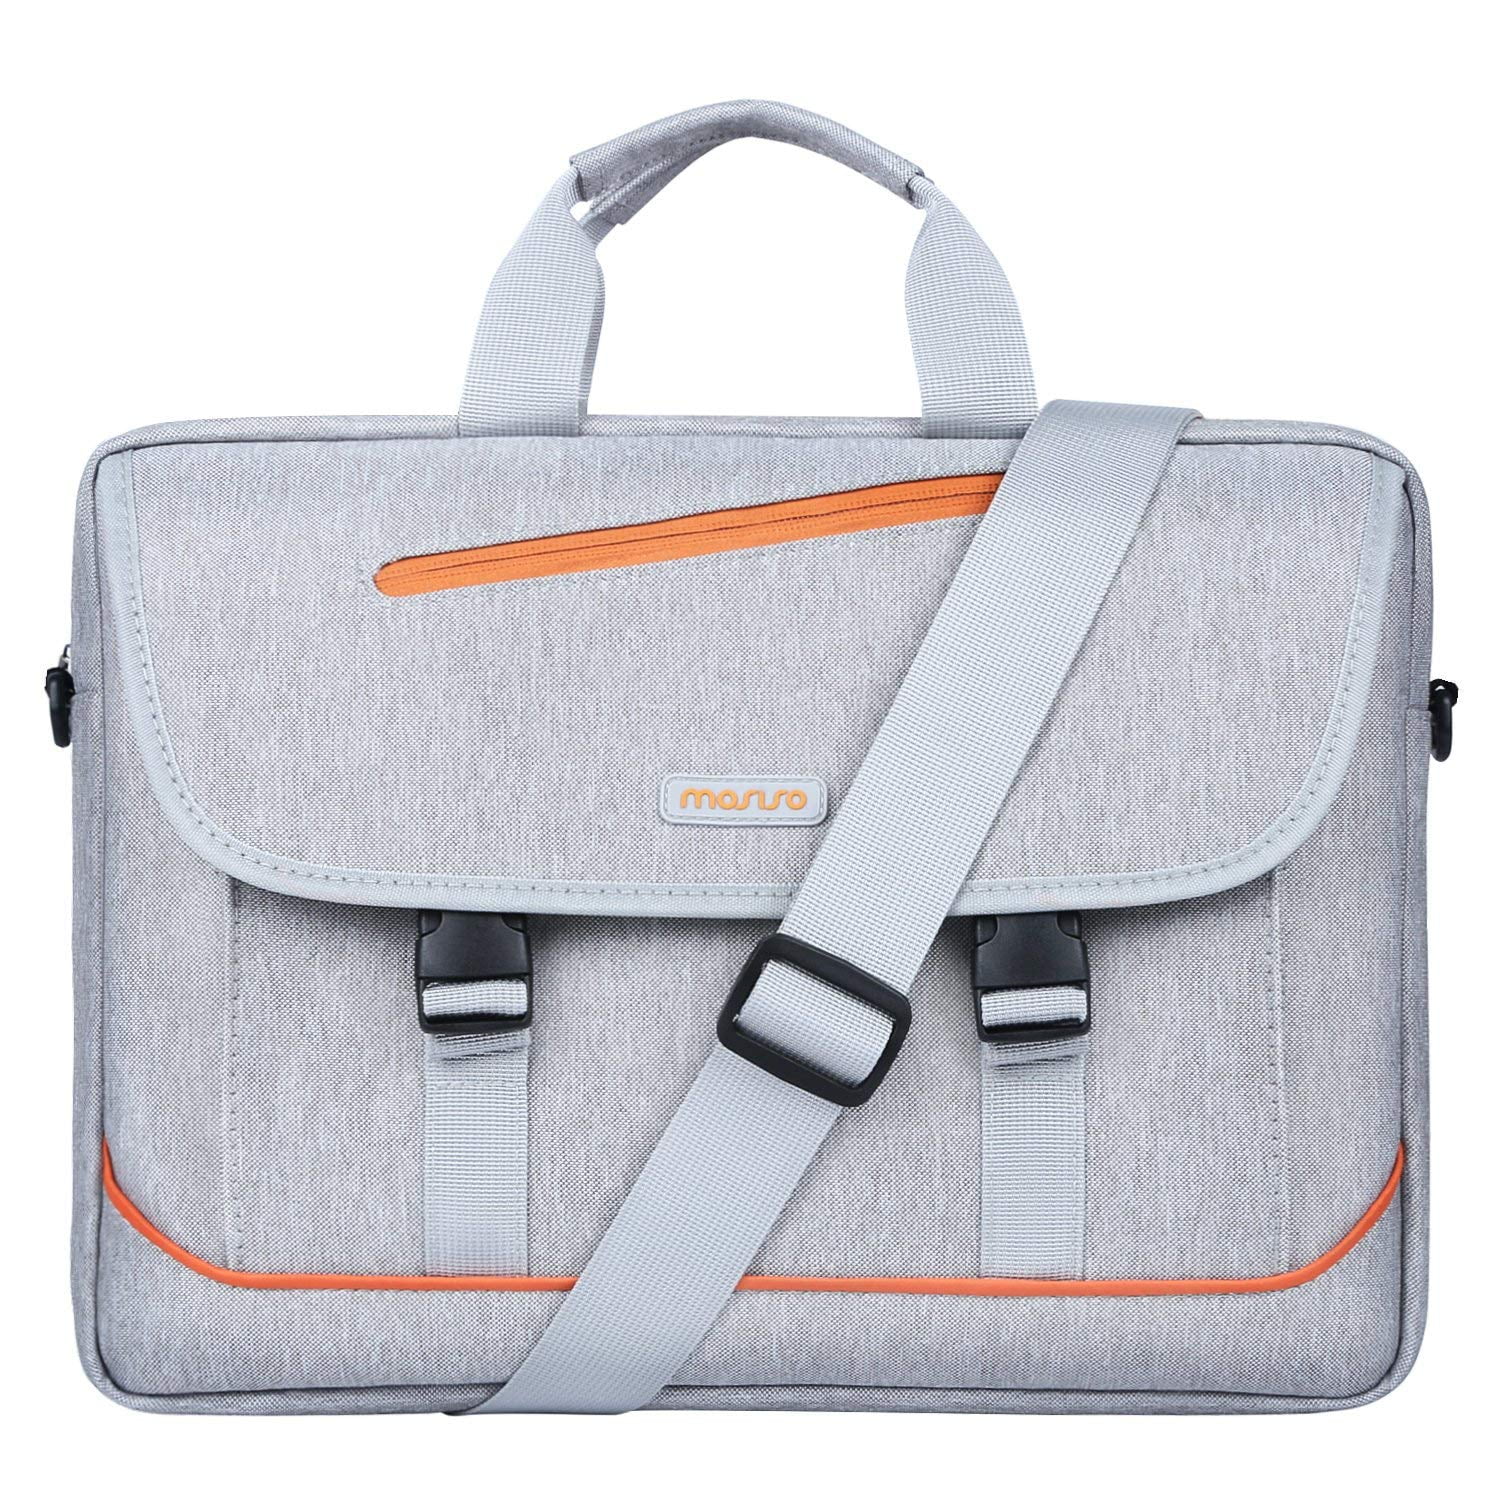 Mosiso Laptop Shoulder Bag for 13-13.3 Inch MacBook Pro Air Notebook